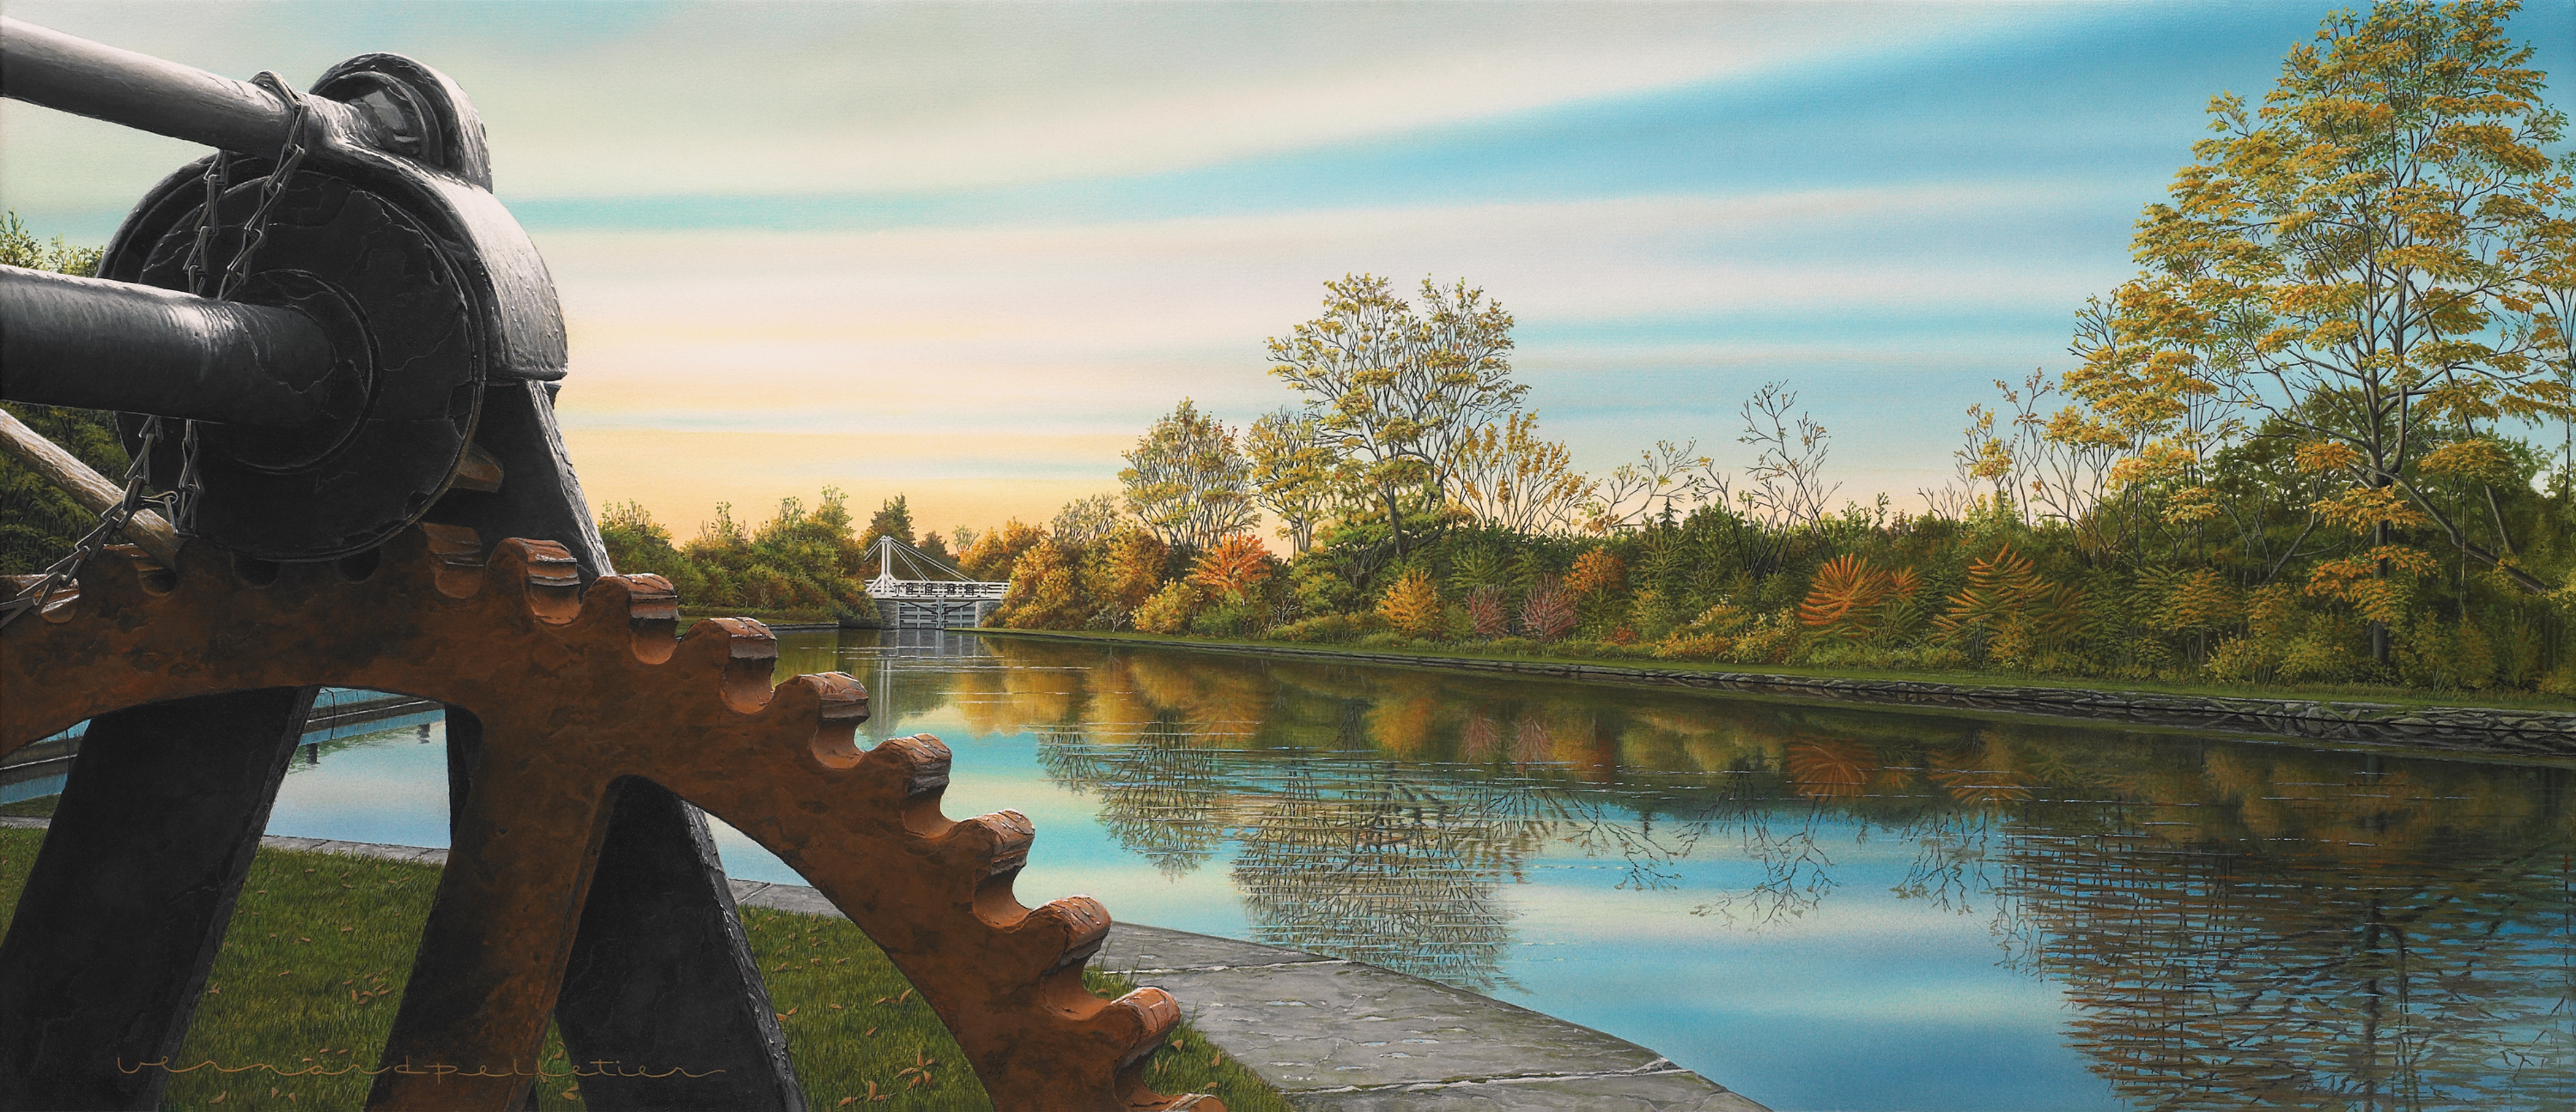 Painting of Rideau Canal